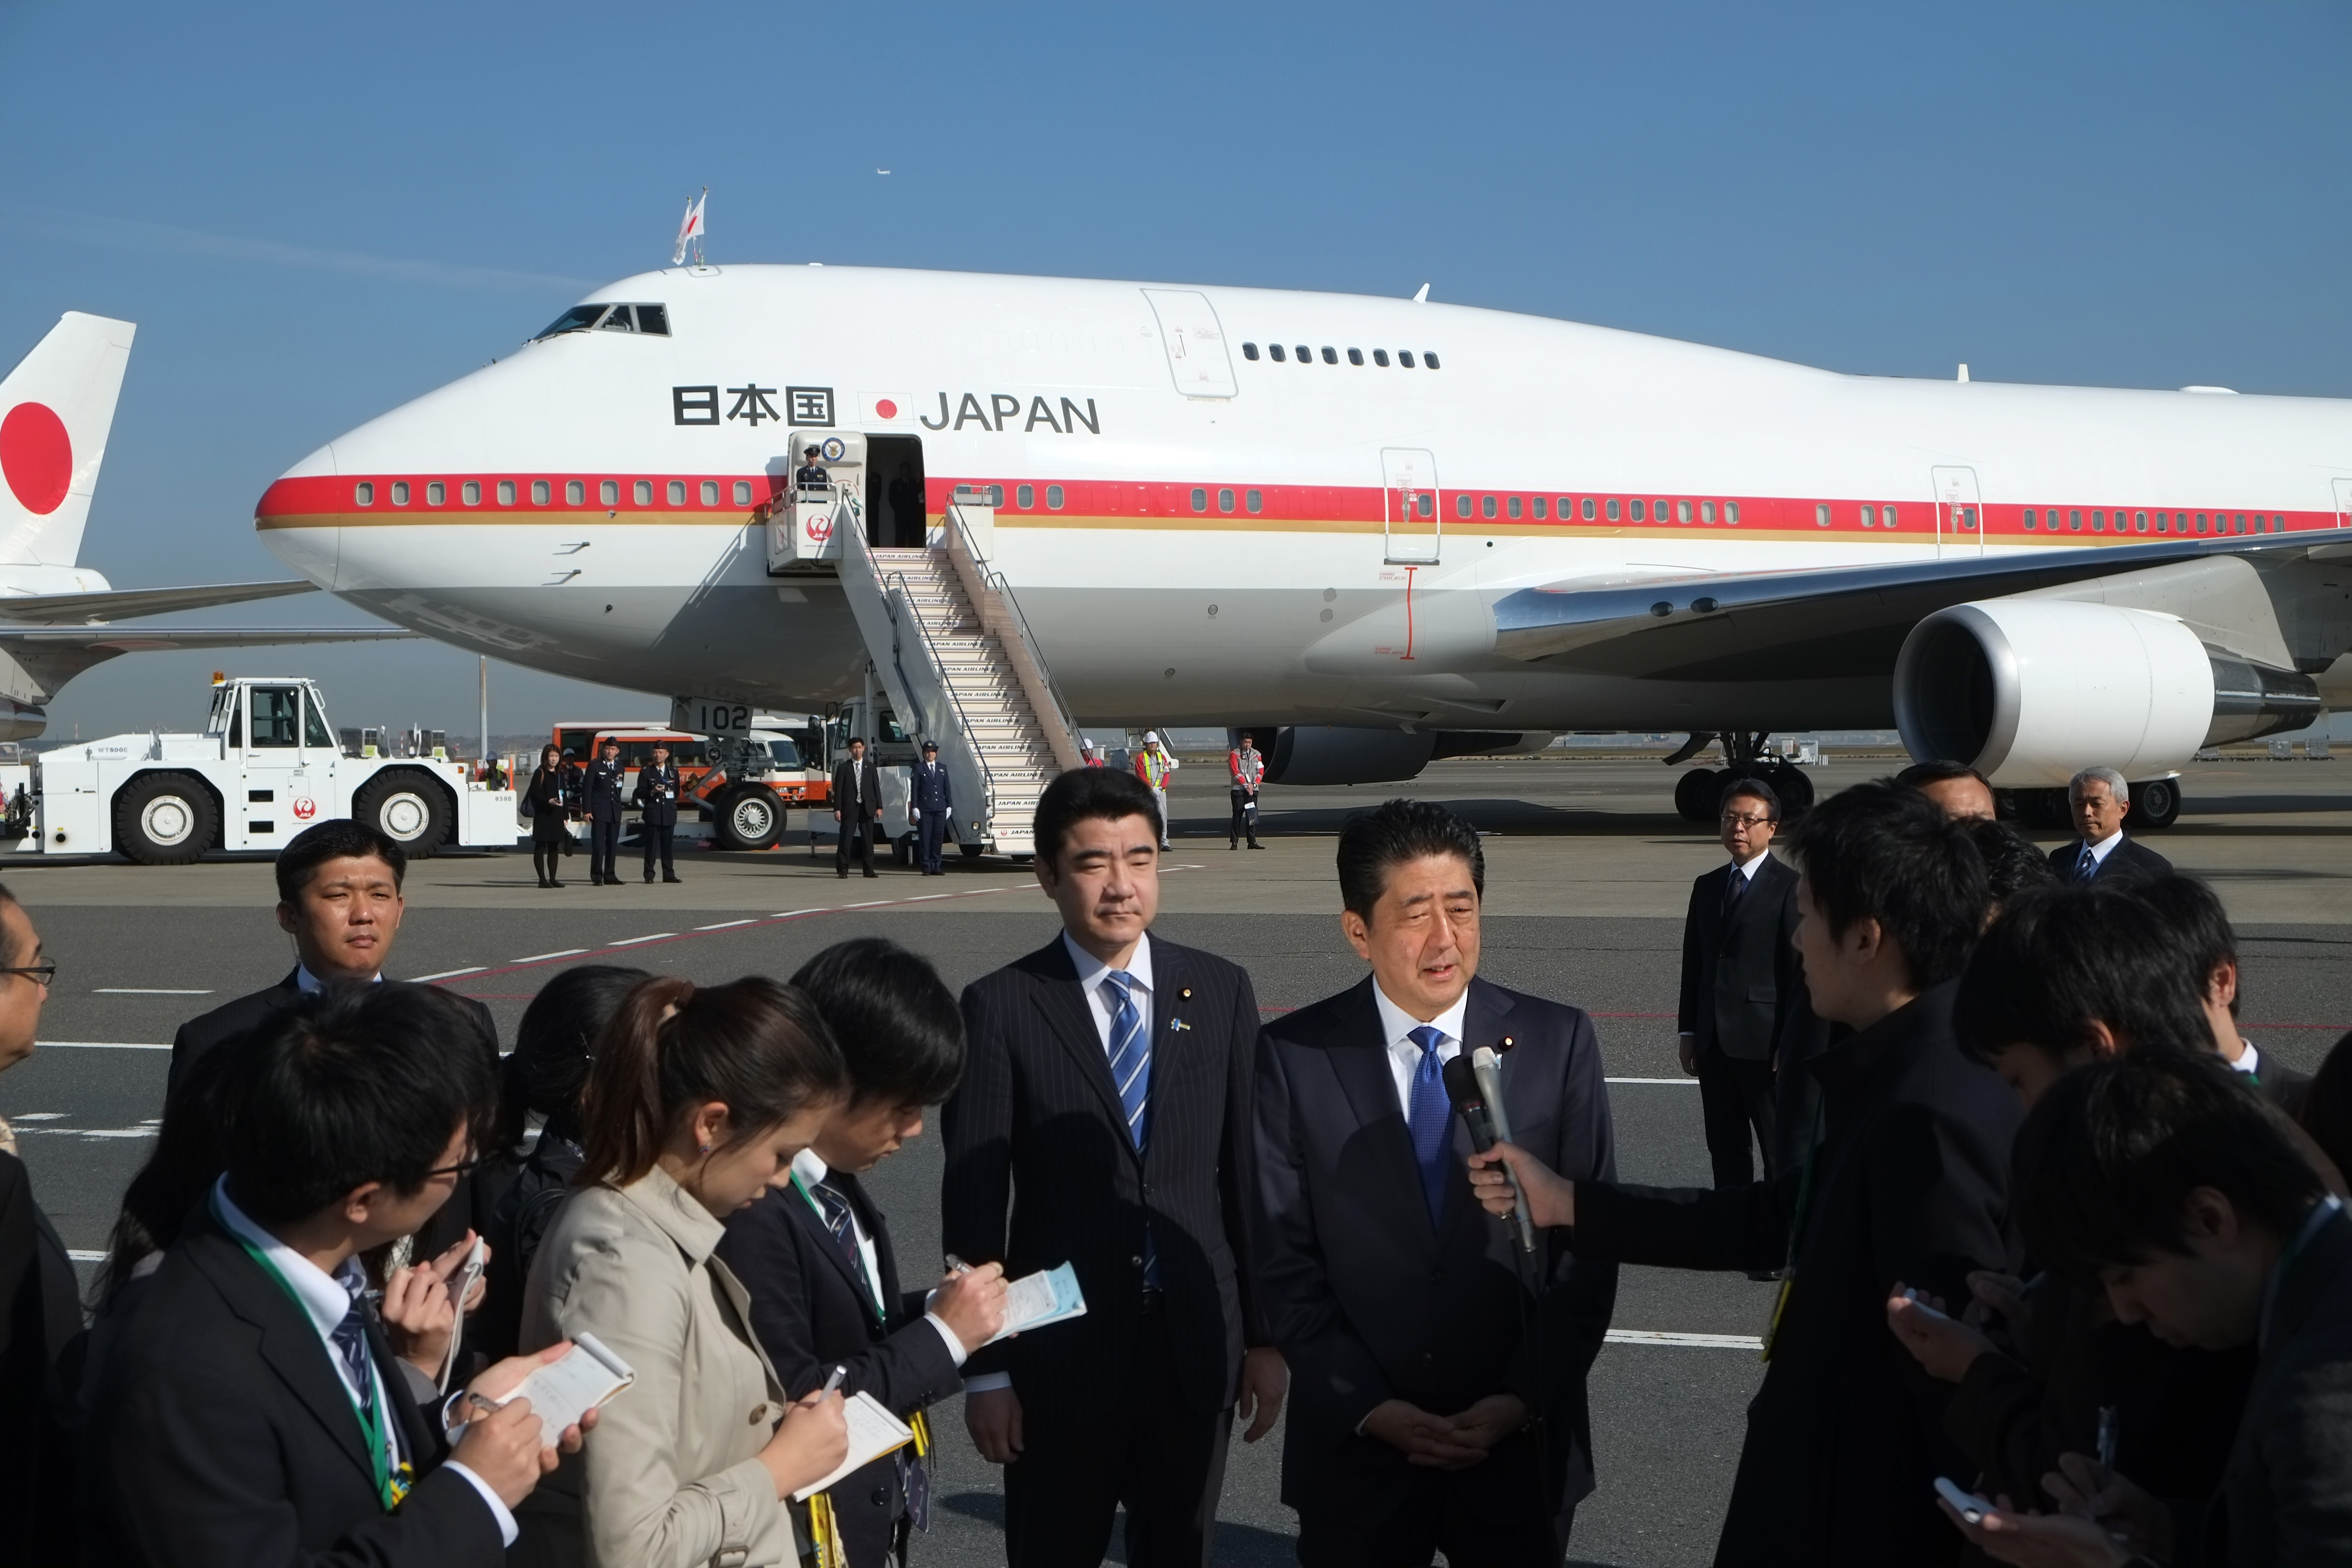 Japan's Prime Minister Shinzo Abe (C) speaks to reporters prior to boarding a government plane at Tokyo's Haneda Airport on November 17, 2016.  Abe headed to New York on November 17 for talks with Donald Trump, the first leader to meet with the president-elect whose campaign pledges provoked anxiety over US foreign policy. / AFP PHOTO / KAZUHIRO NOGI